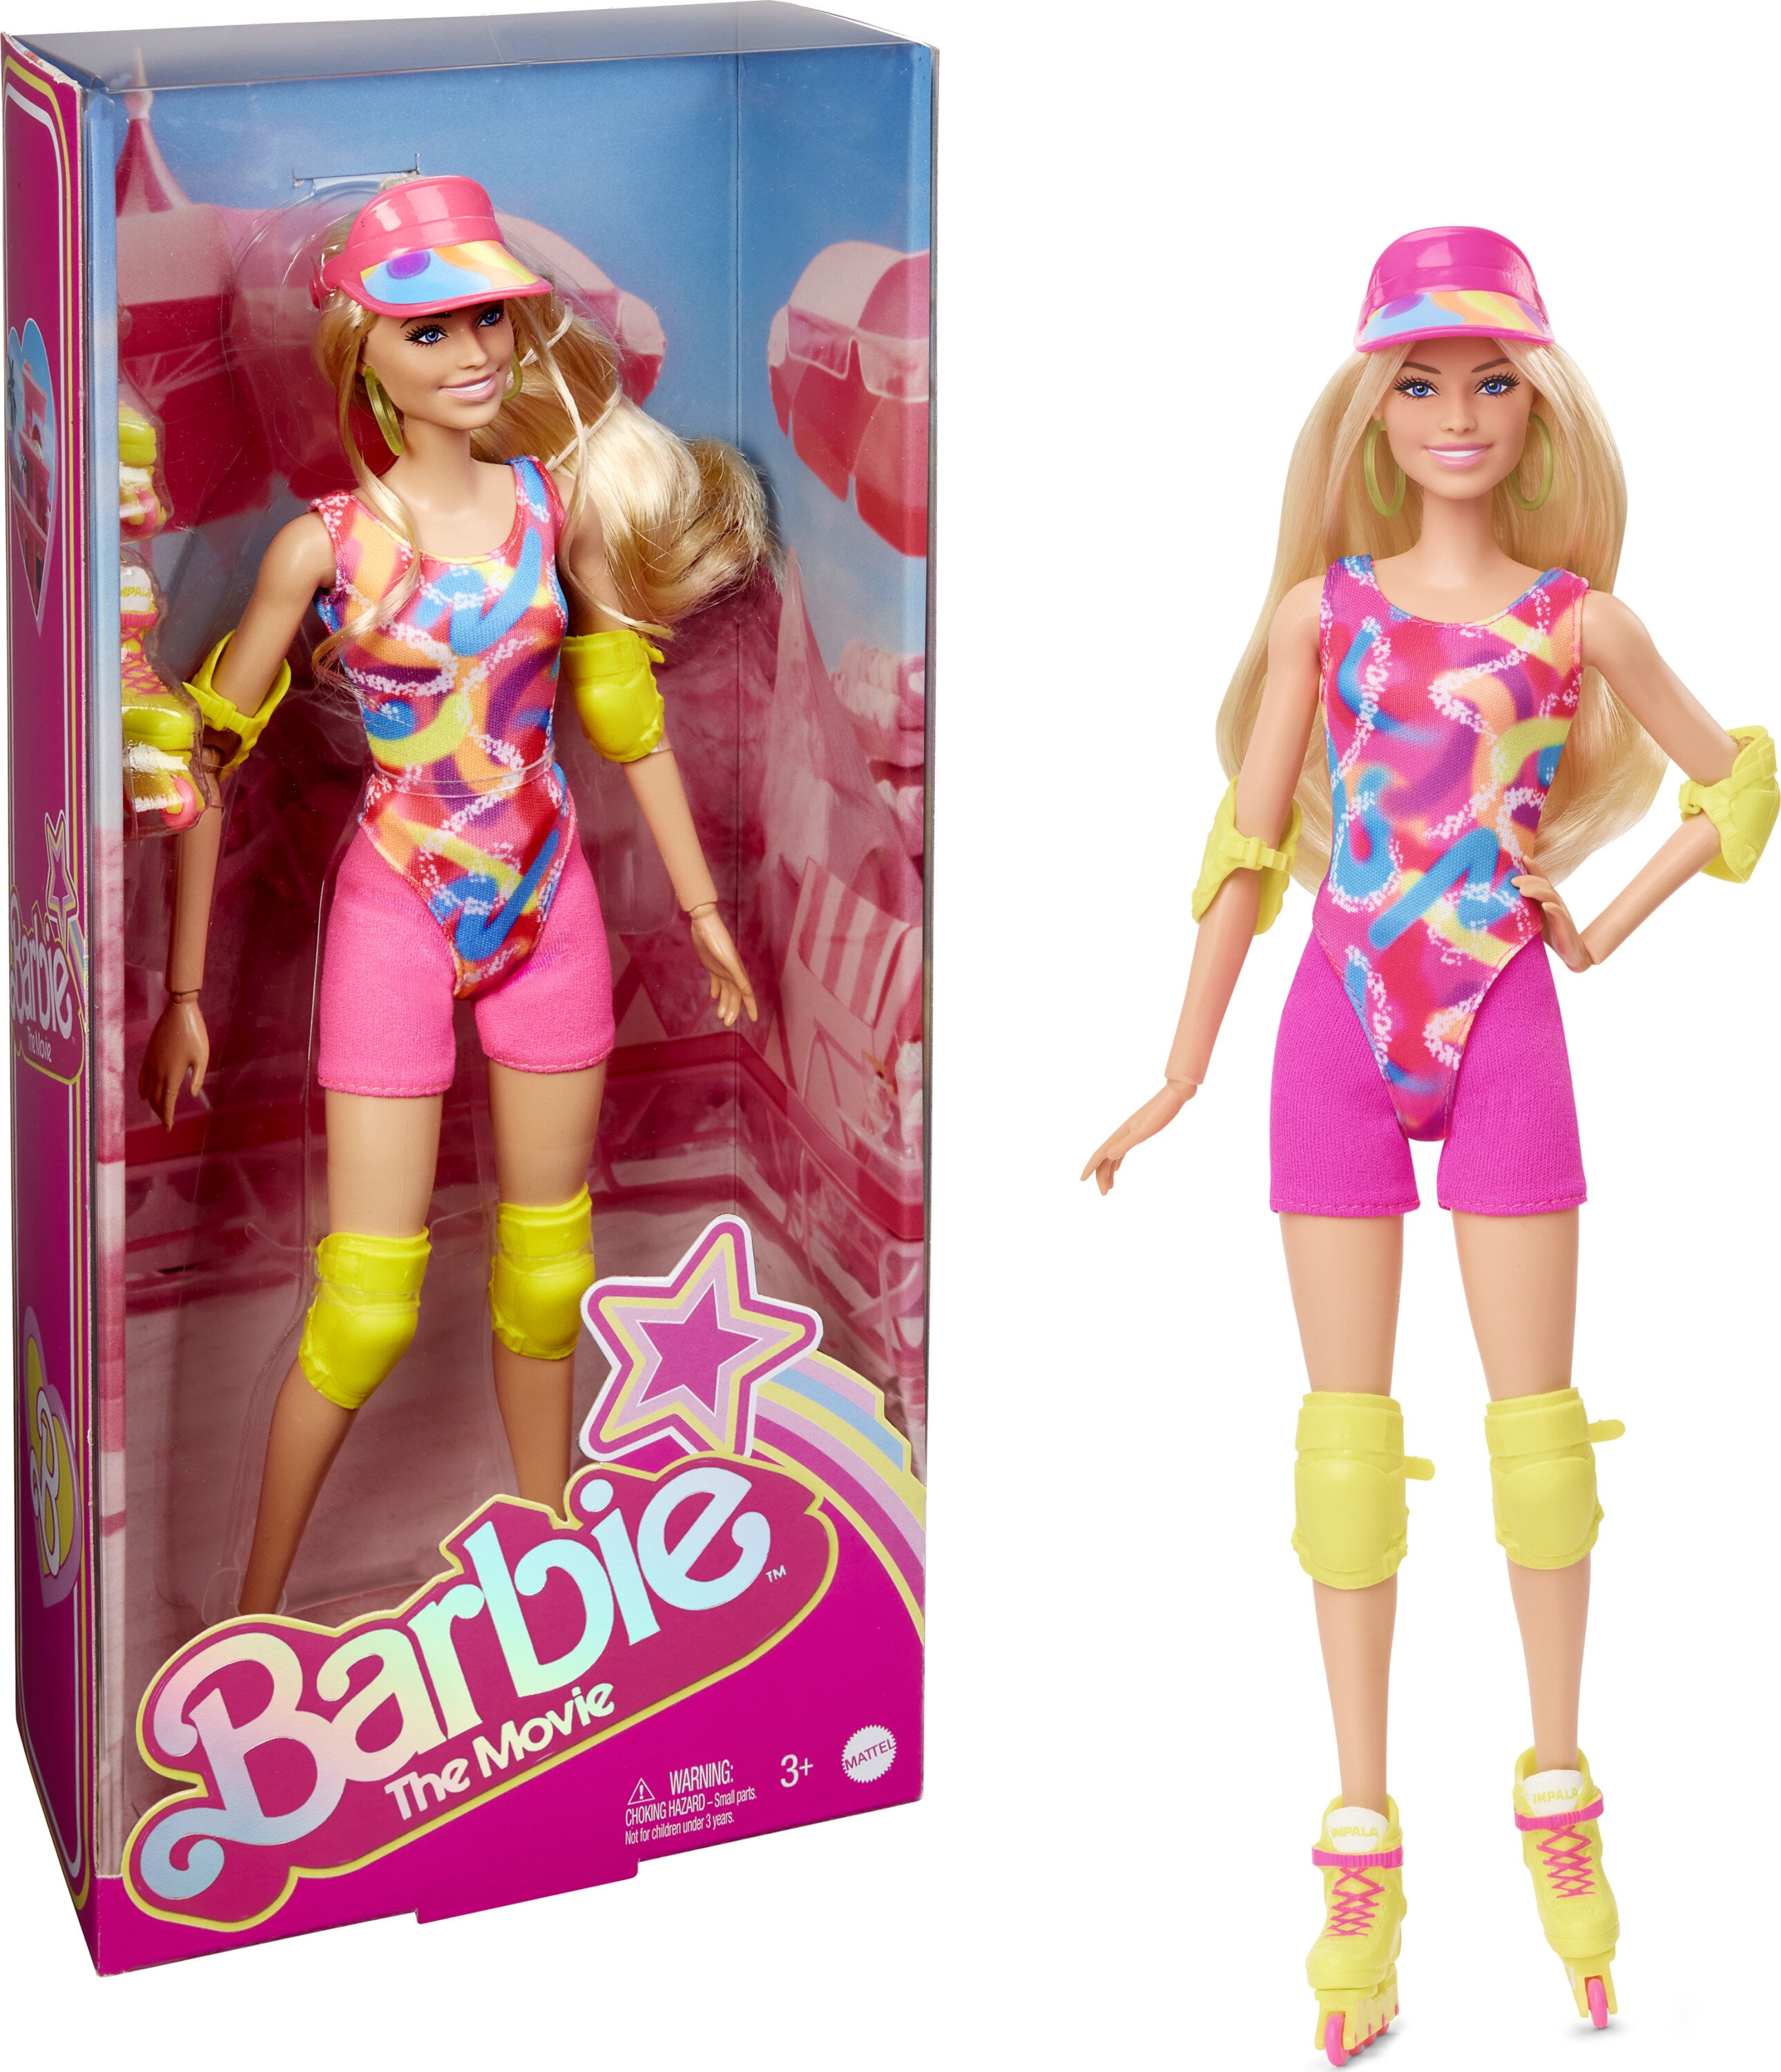 Barbie The Movie Collectible Doll, Margot Robbie as Barbie in Inline ...